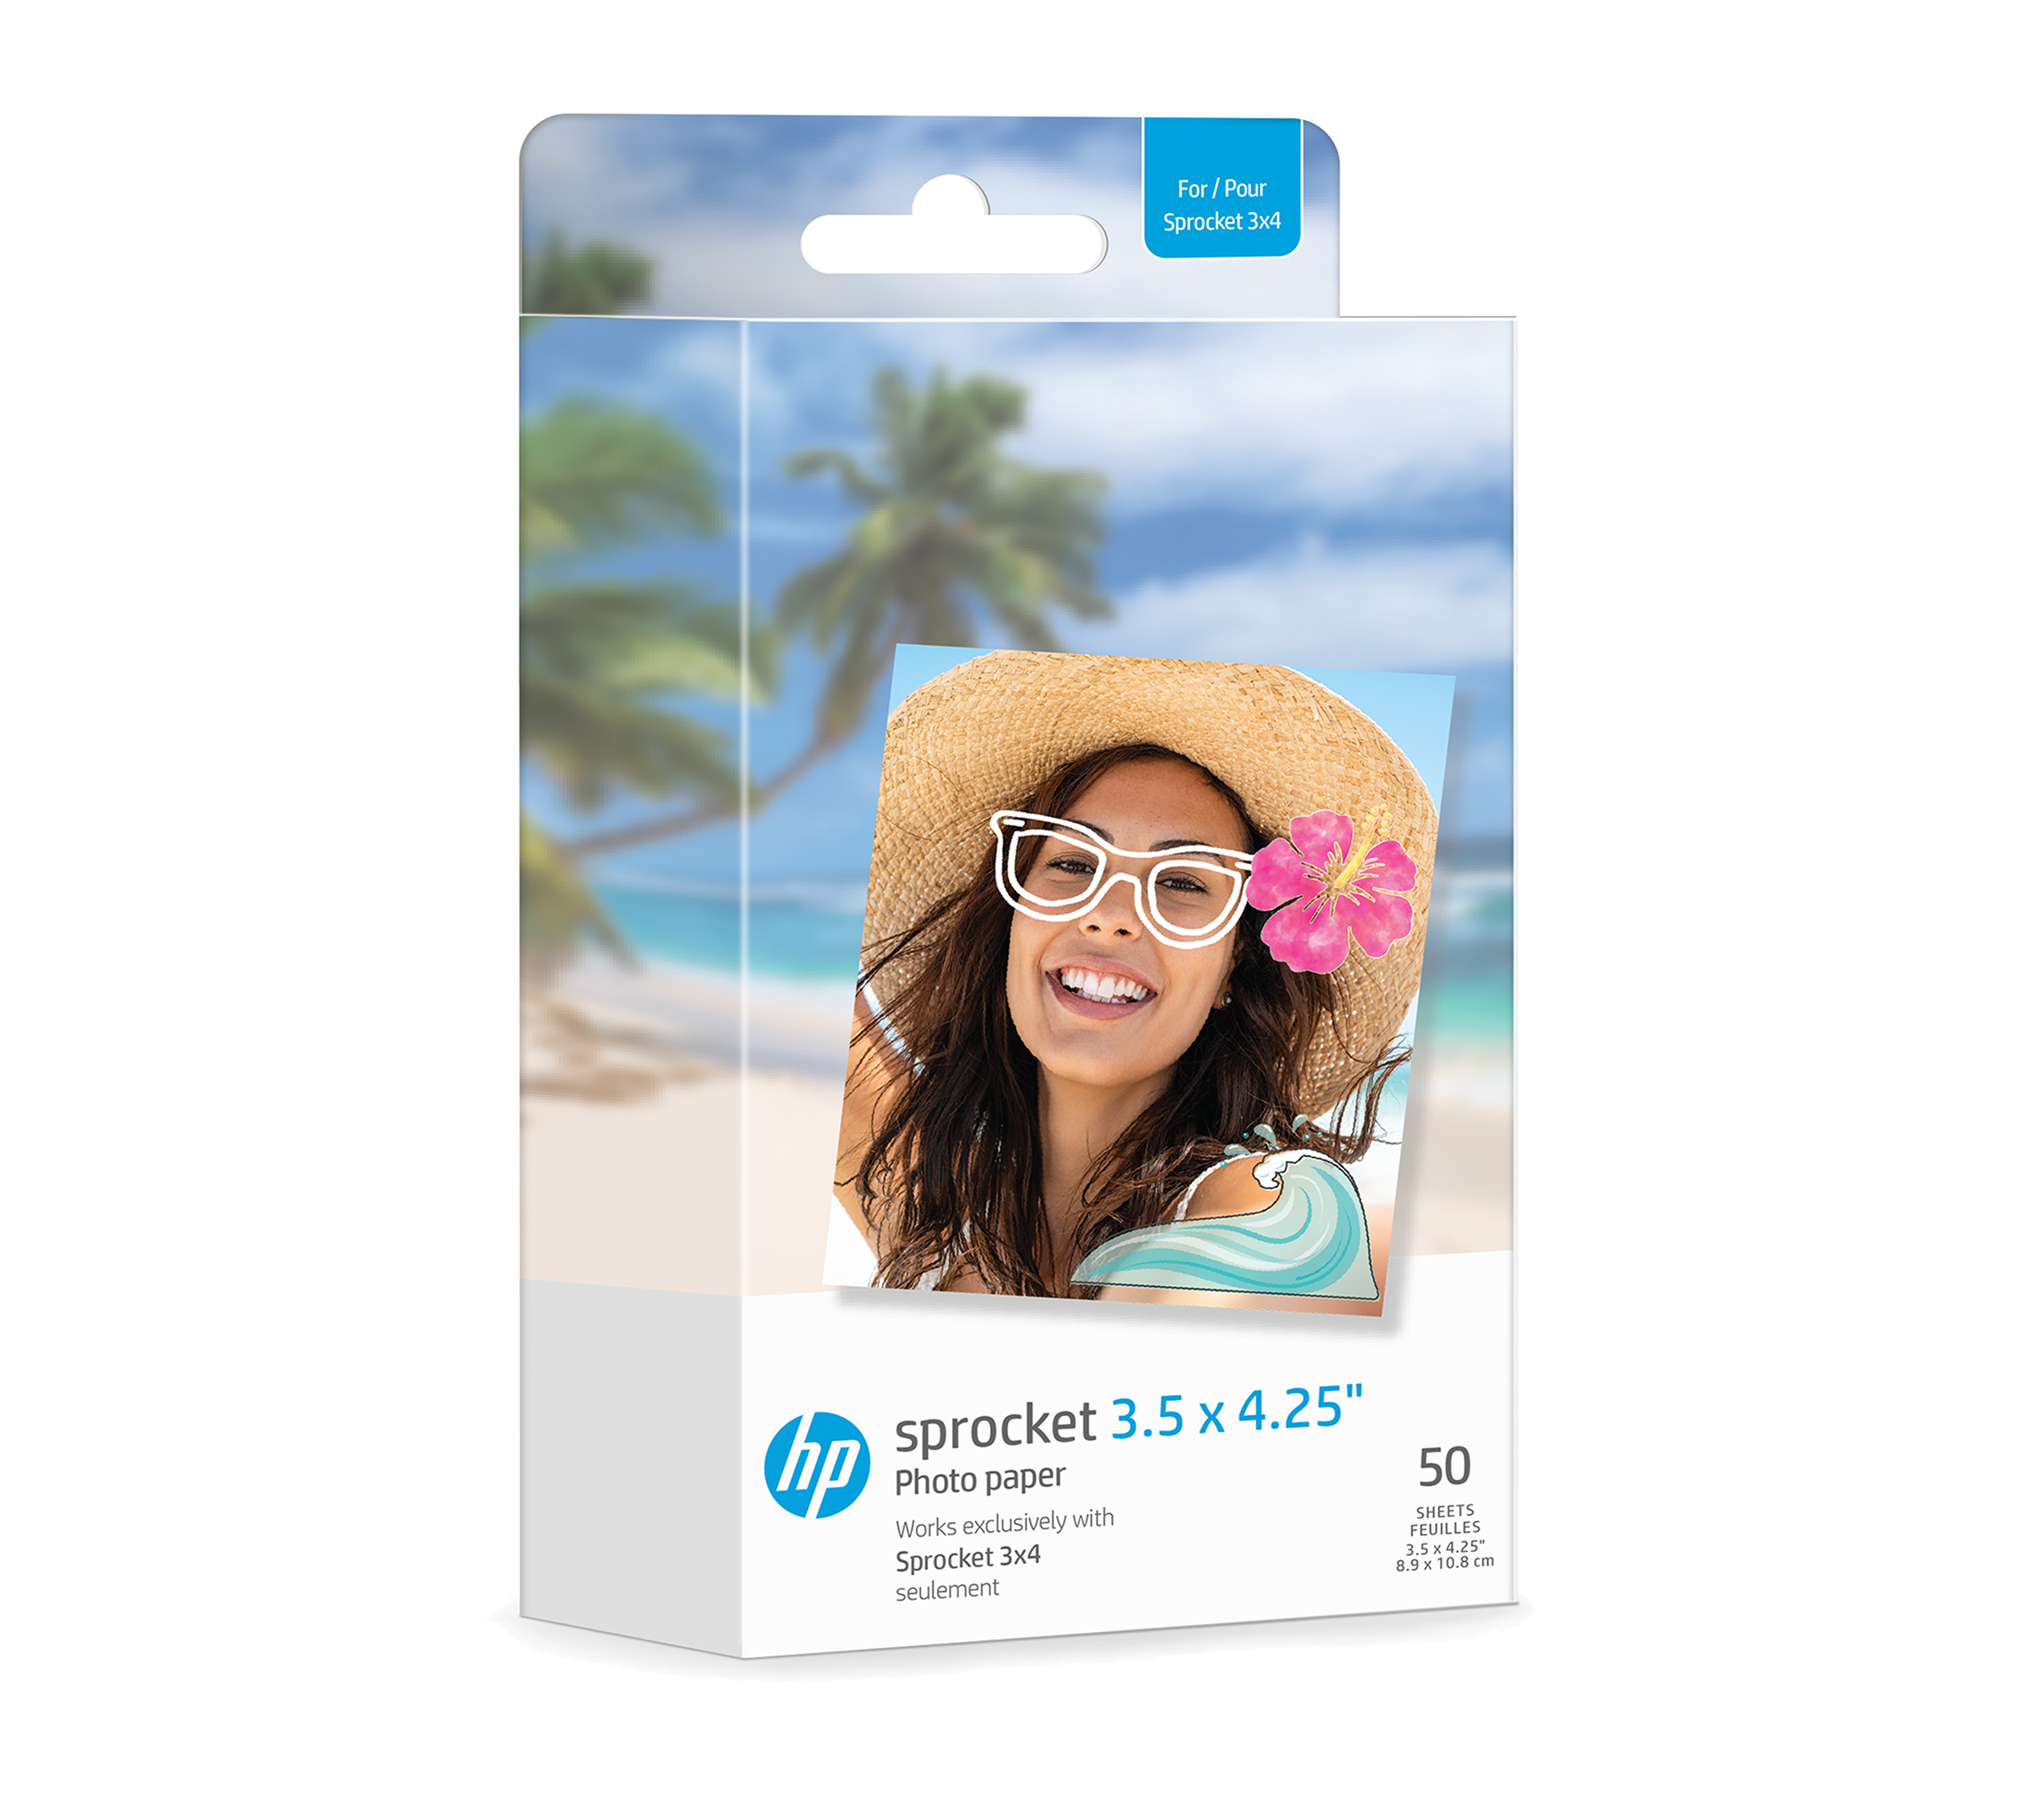 HP Sprocket 3.5 x 4.25 Zink Sticky-backed Photo Paper (50 Pack) Compatible with HP Sprocket 3x4 Photo Printer Sprocket Printers